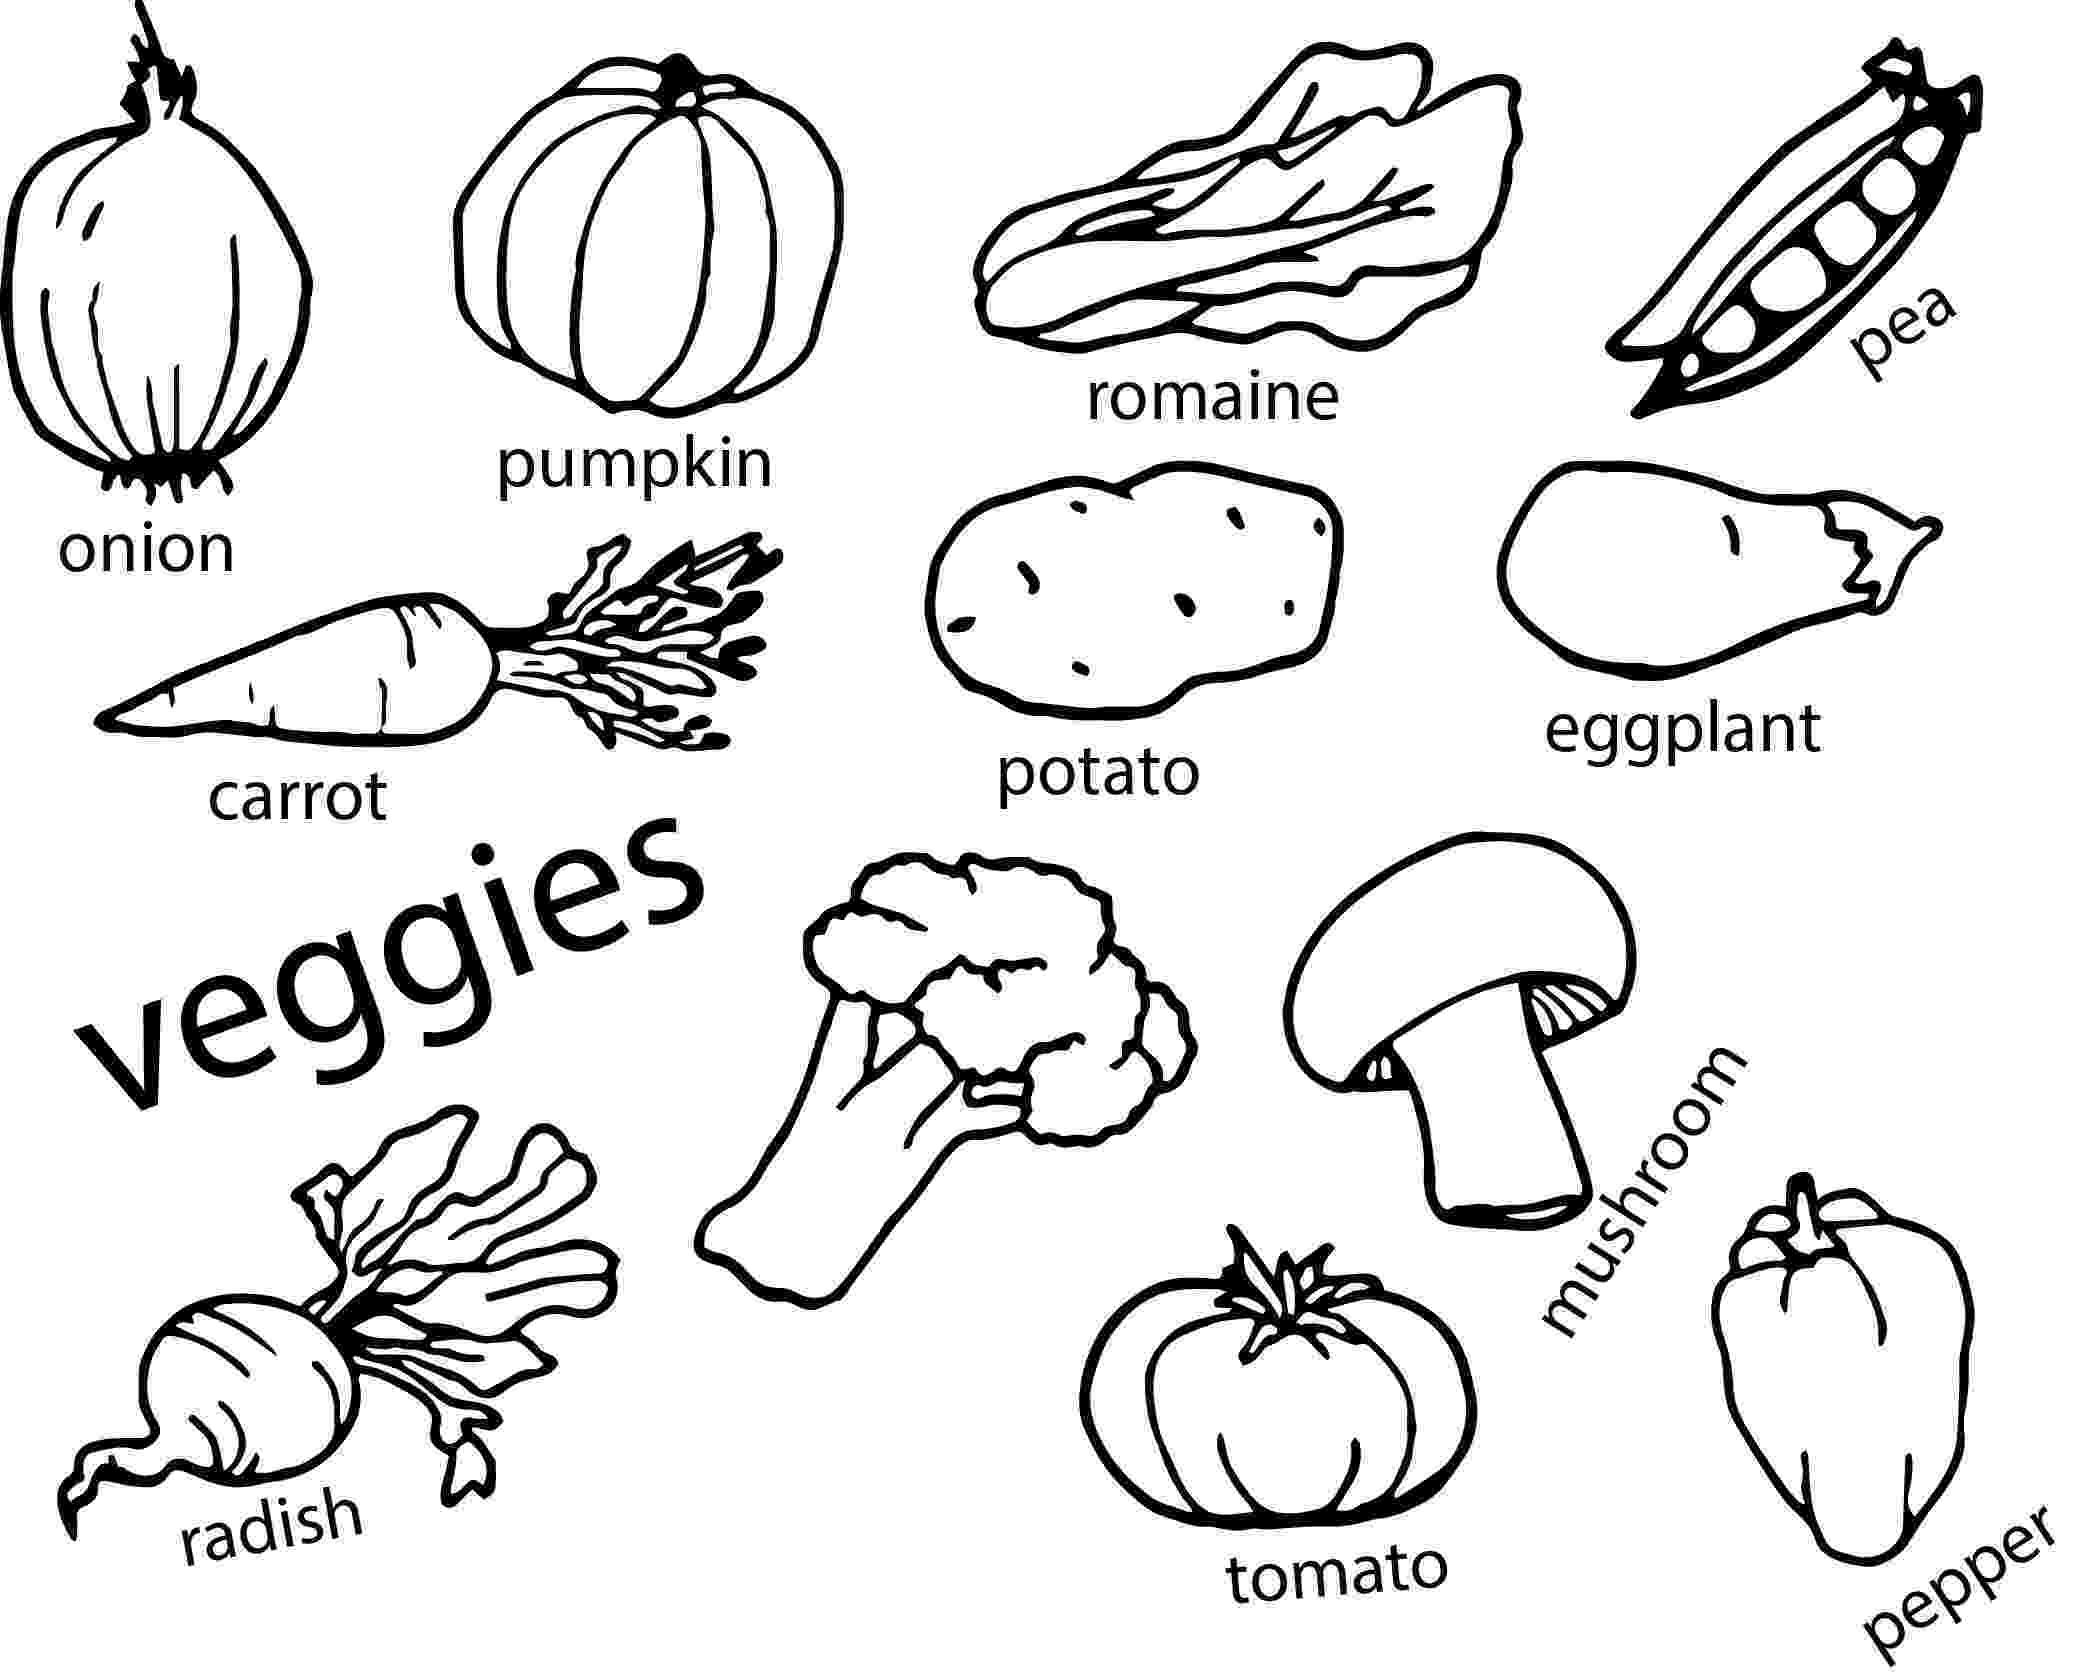 coloring pages for vegetables vegetables coloring page wecoloringpagecom vegetables for coloring pages 